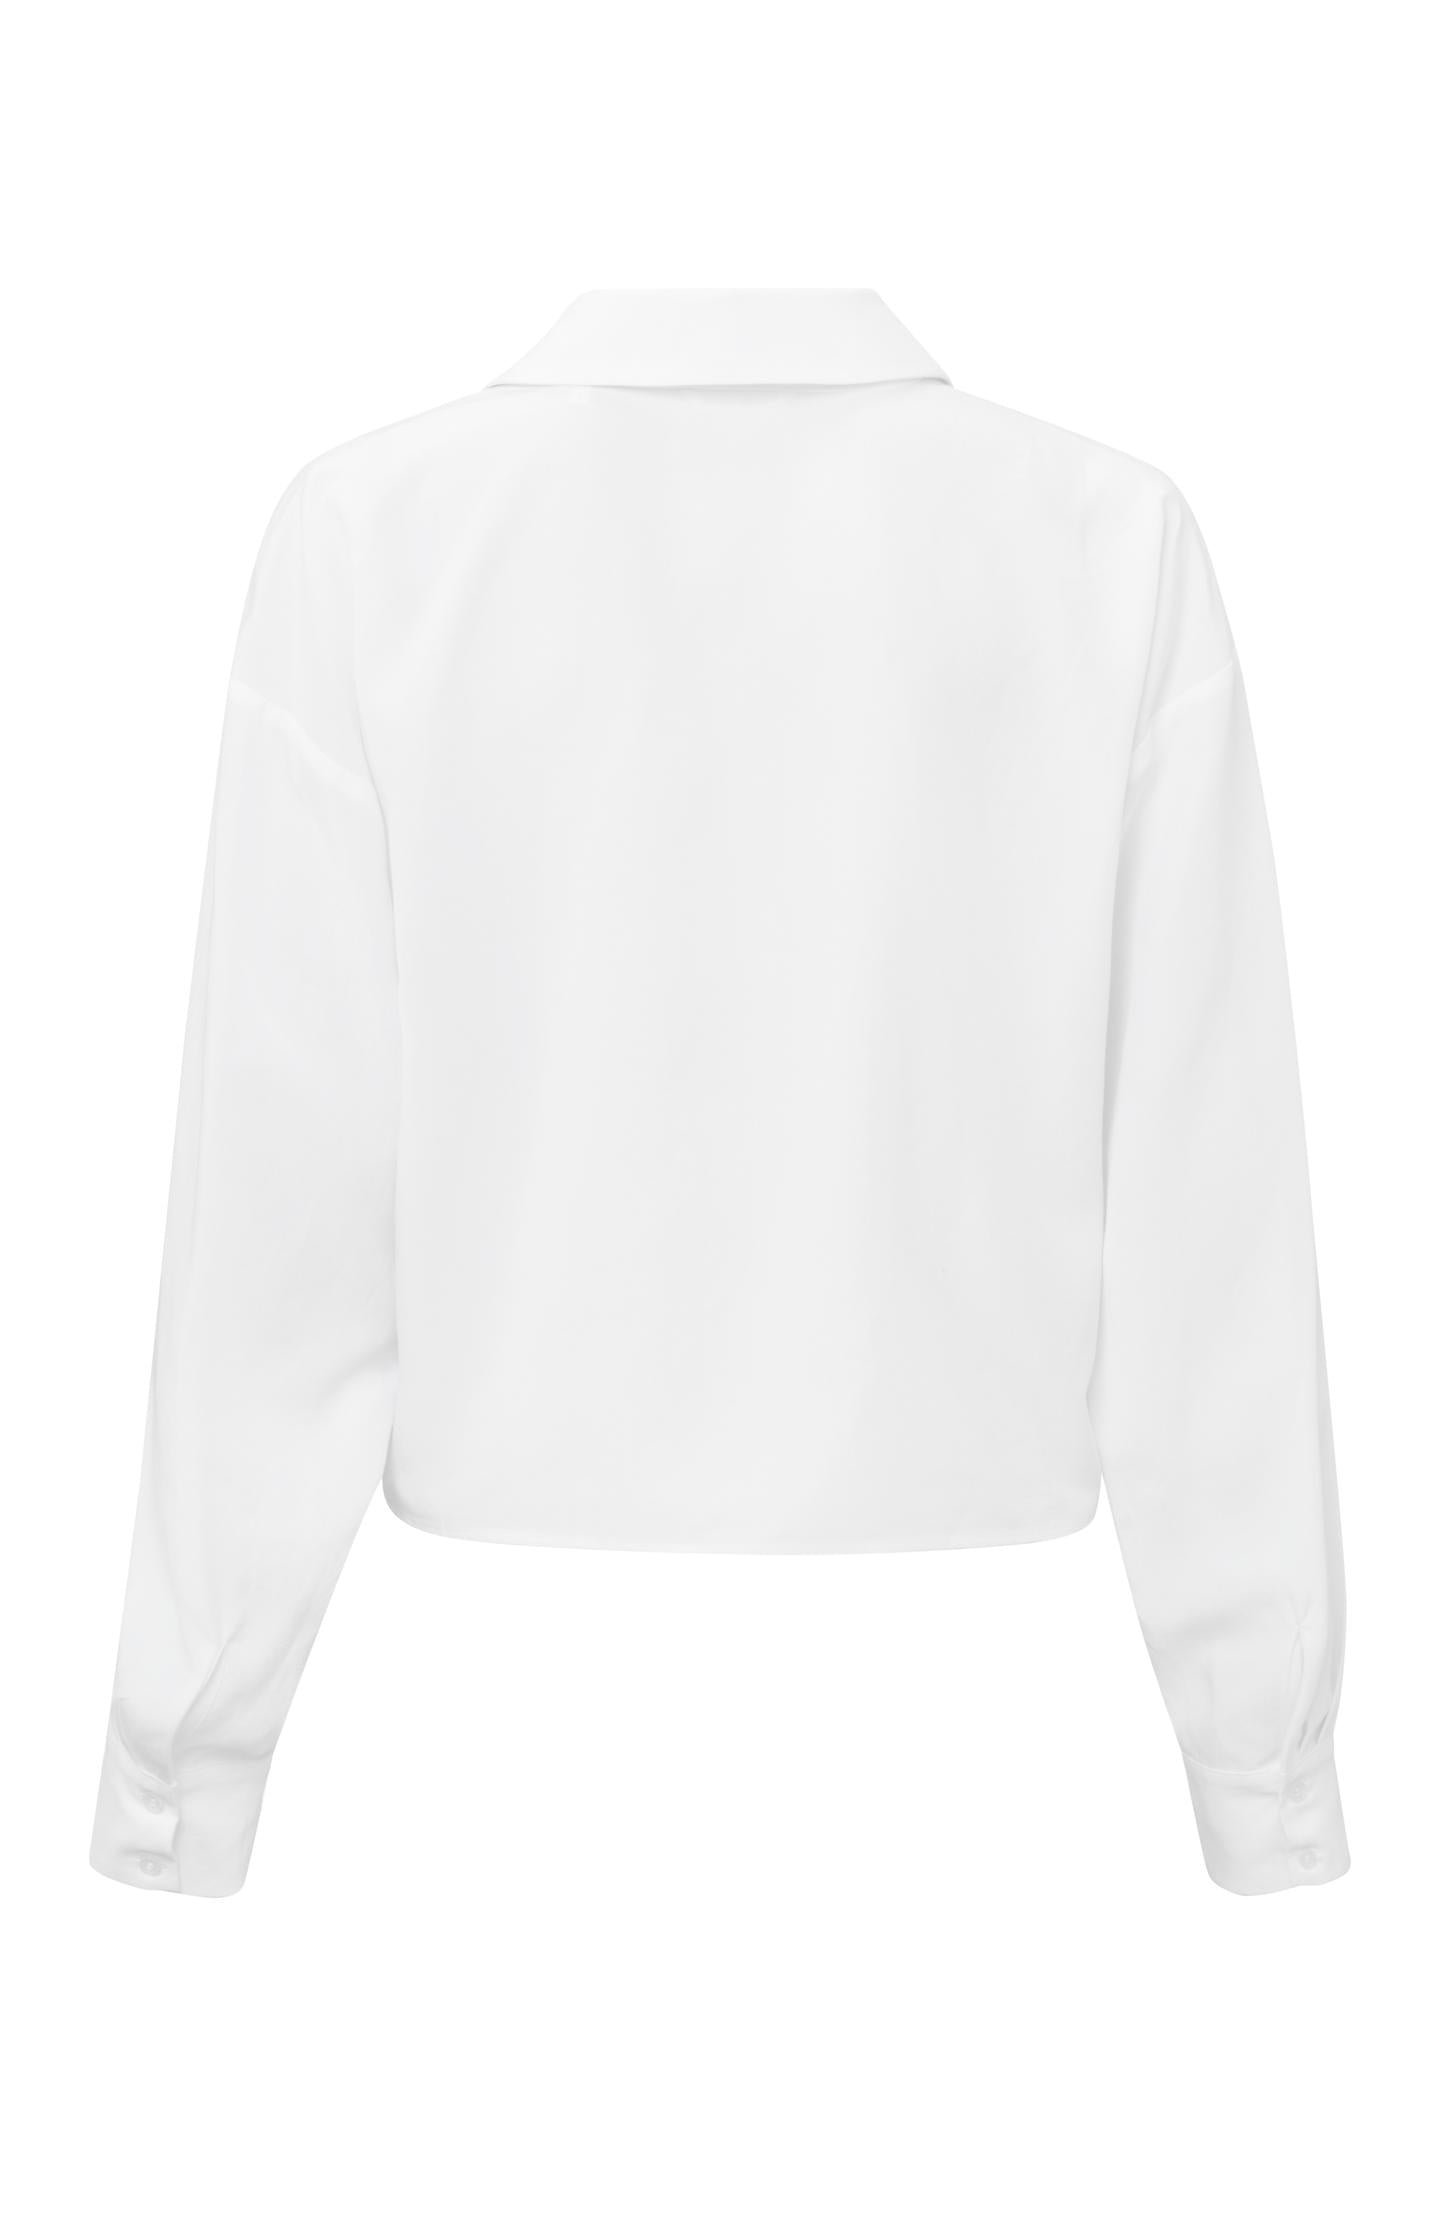 Asymmetrical blouse with V-neck, long sleeves and buttons